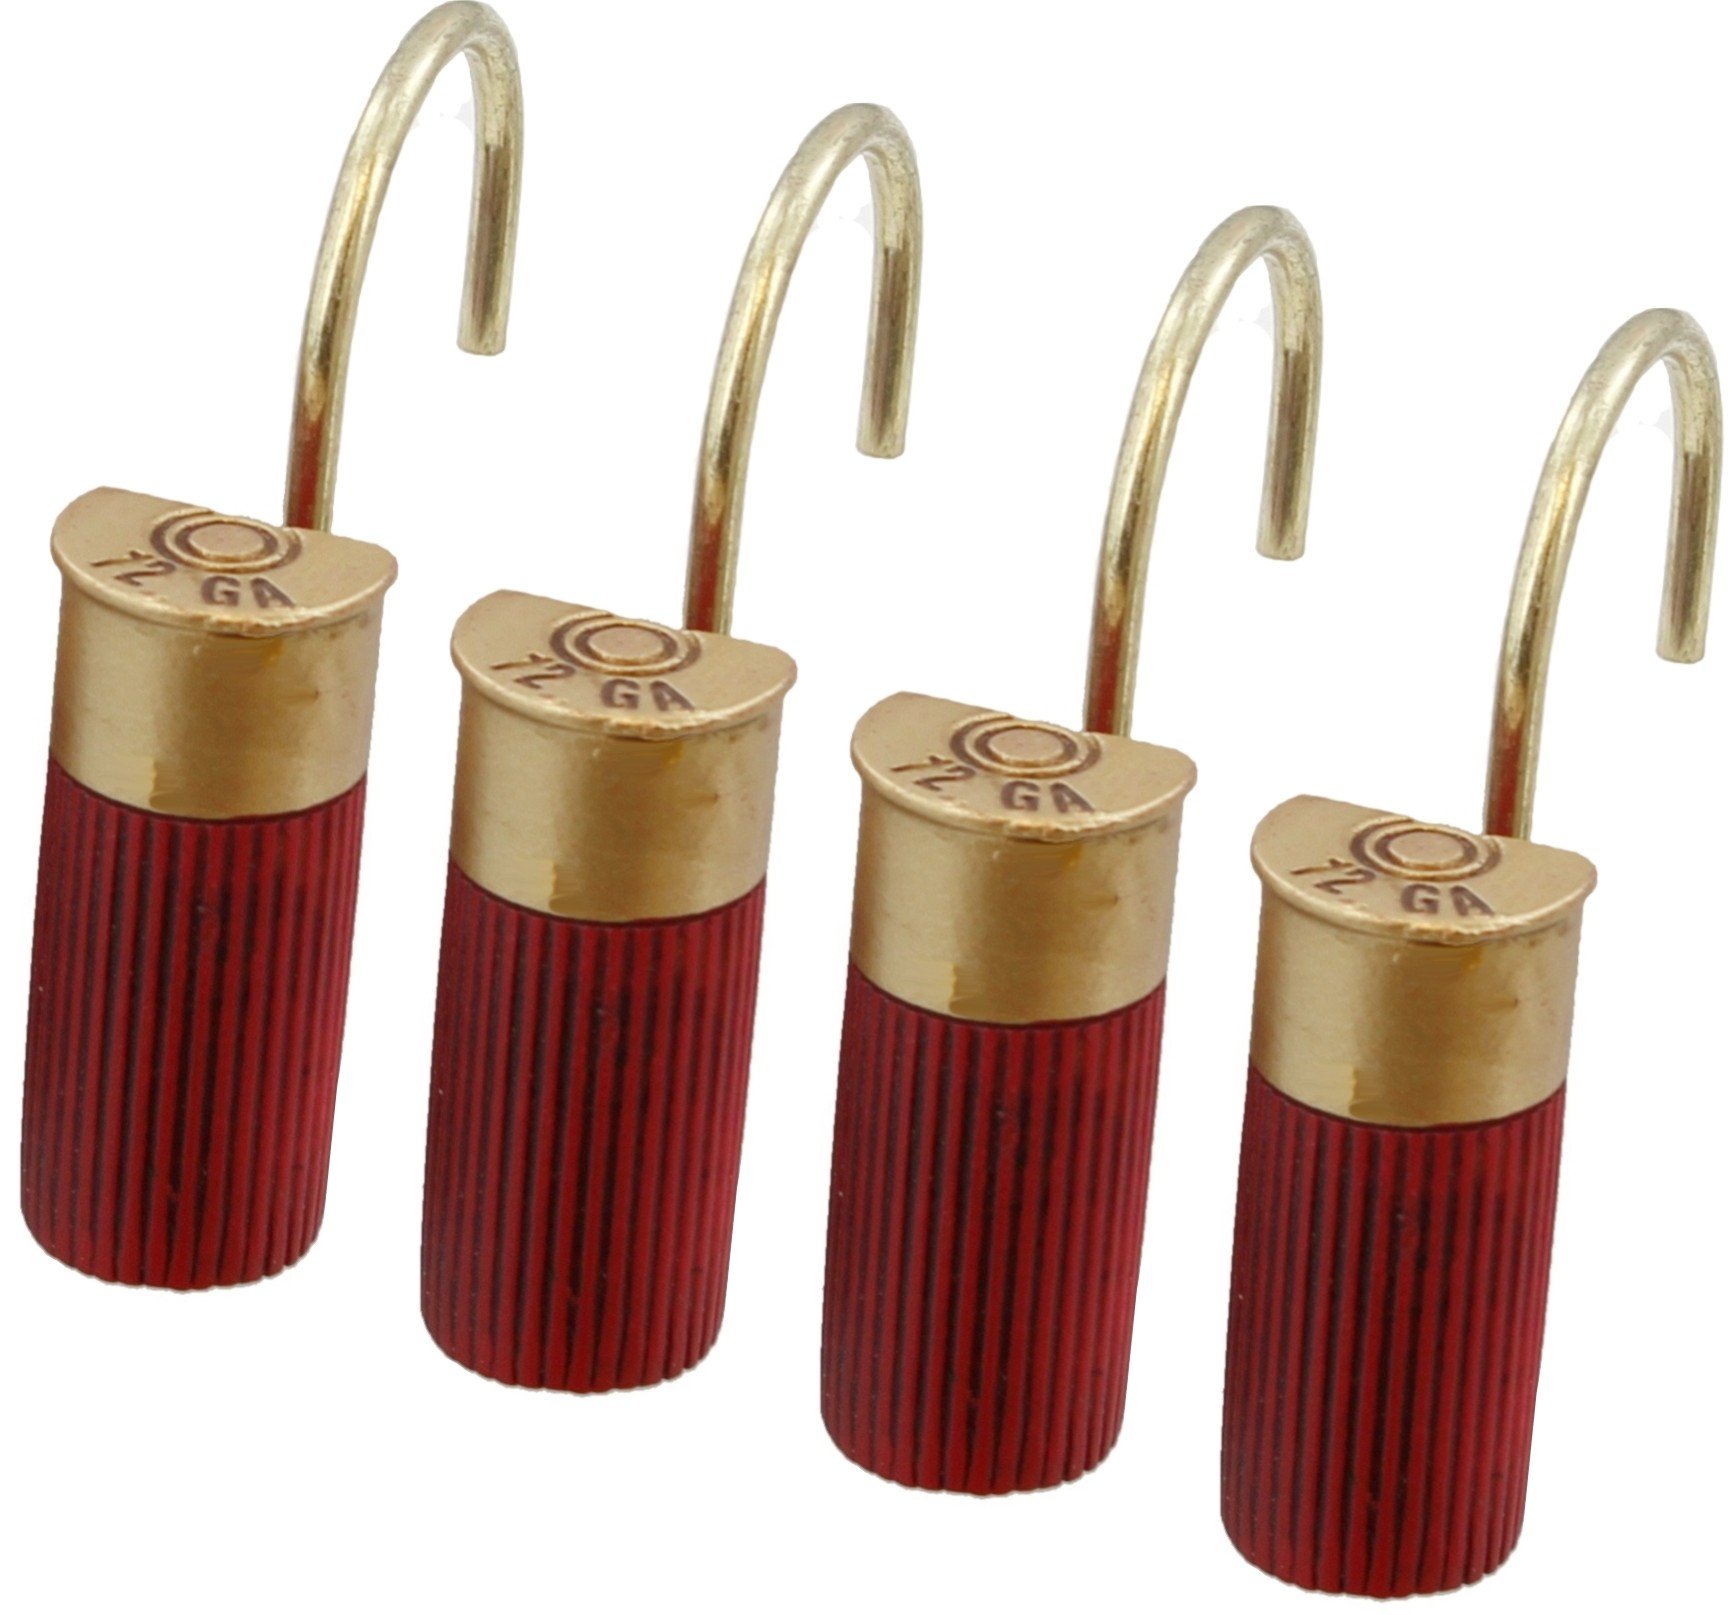 Book Cover Old River Outdoors Red Shotgun Shell Shower Curtain Hooks/Rings - 12 Pc Set